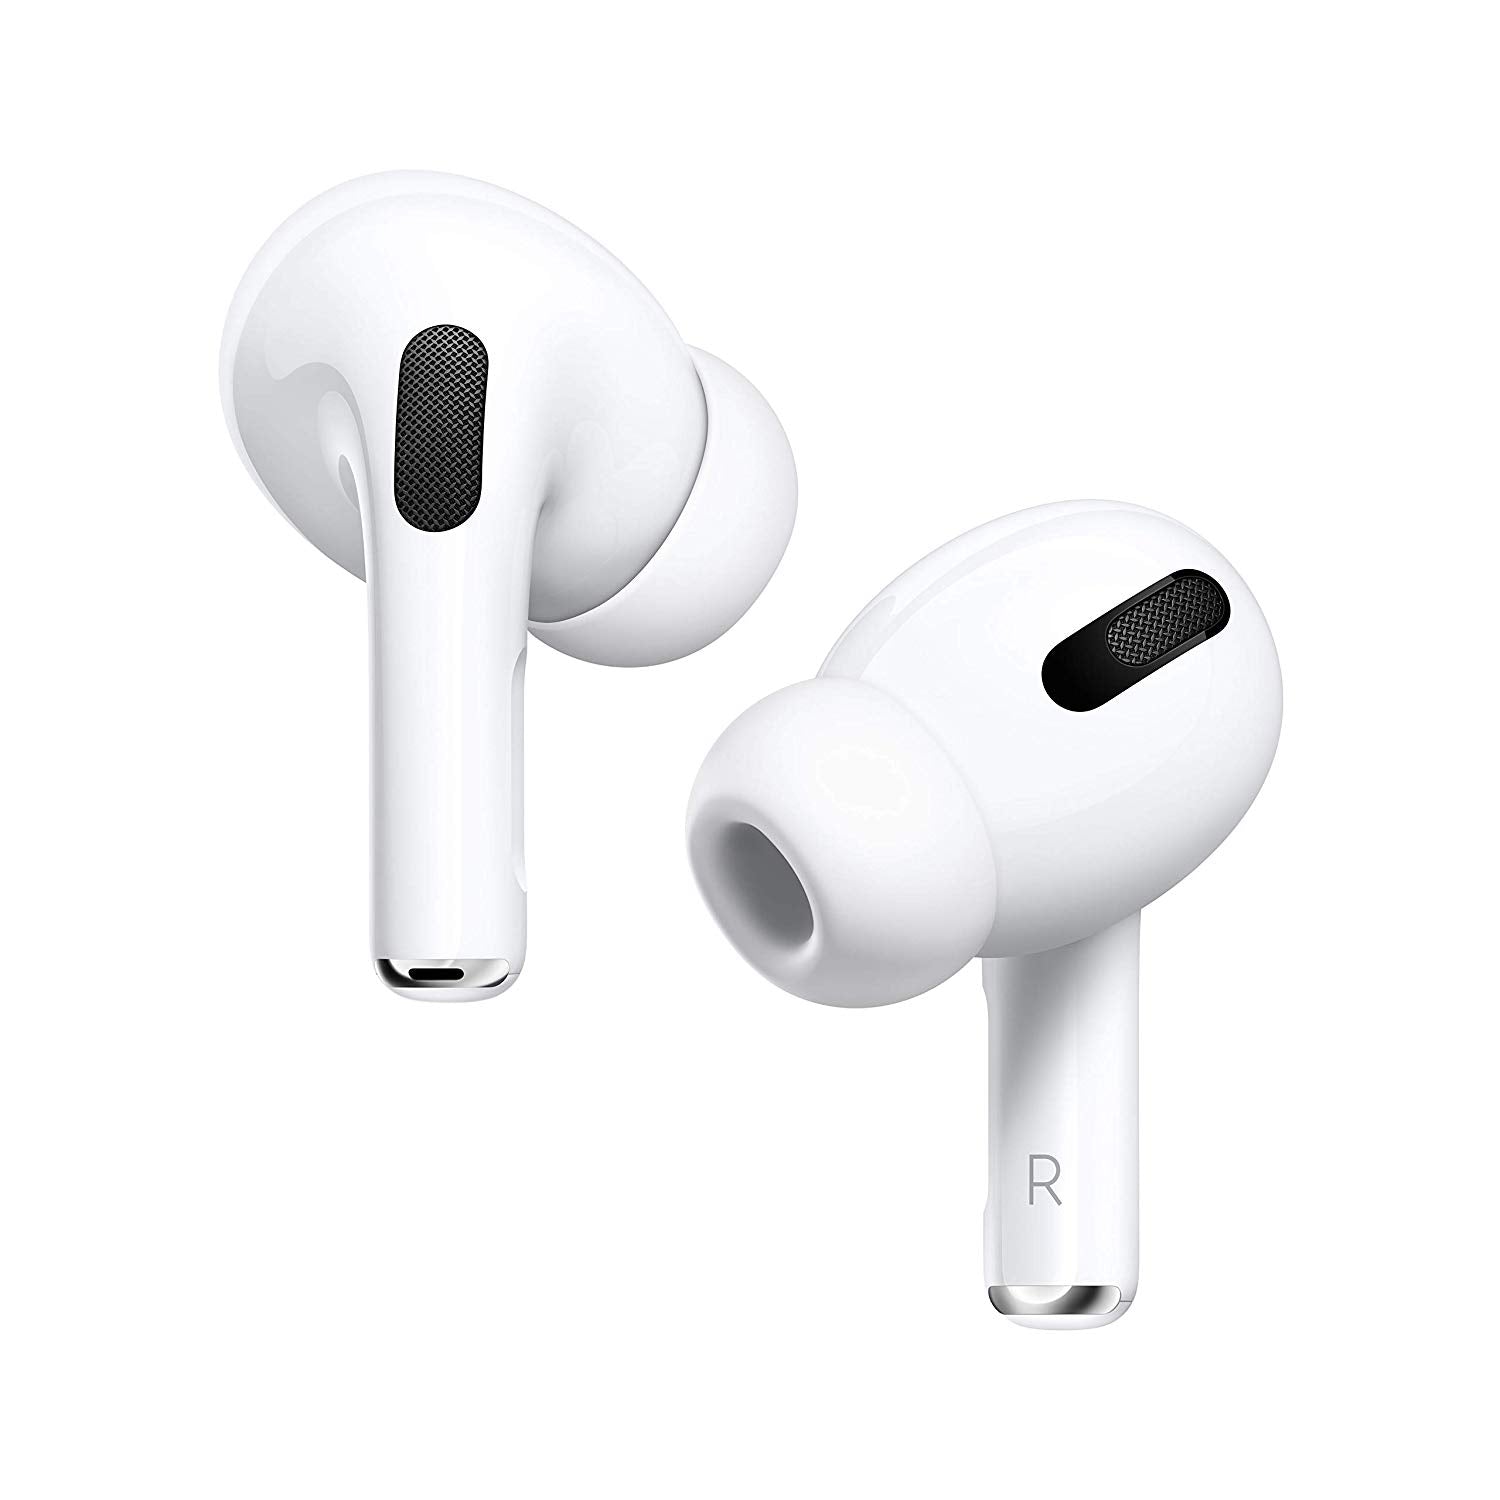 Open Box, Unused Apple AirPods Pro 2nd Generation